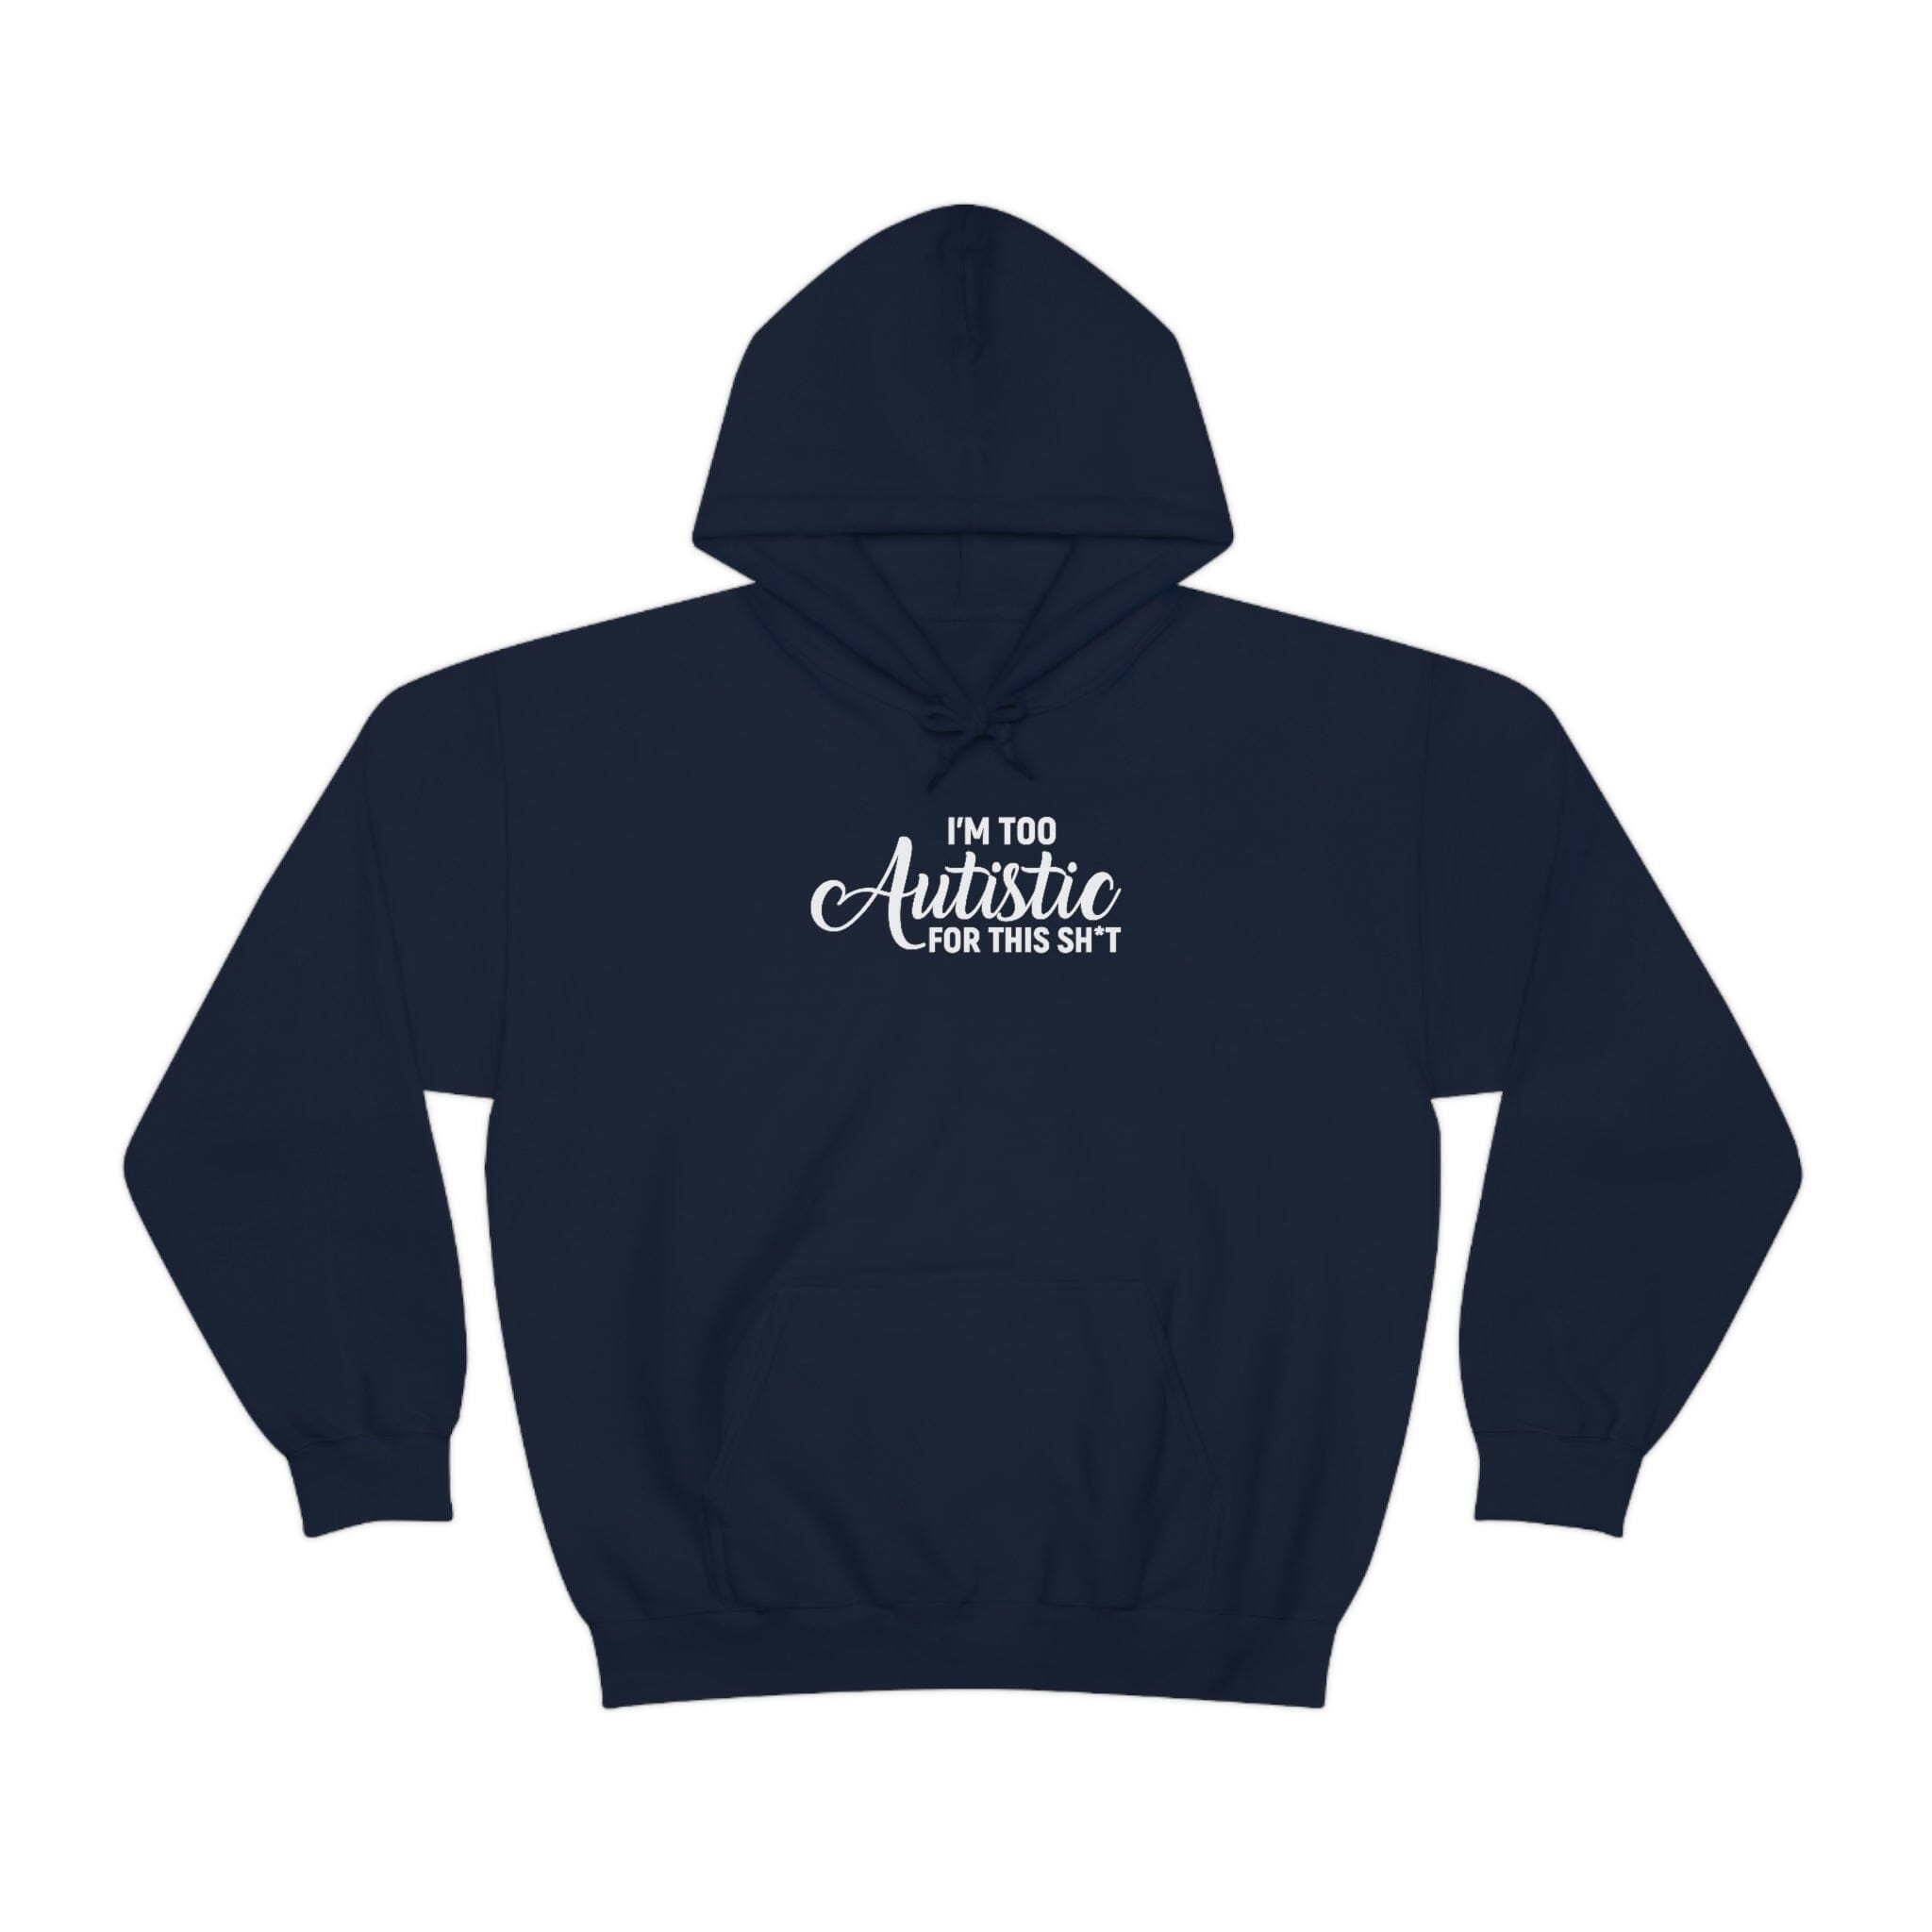 I'm Too Autistic for This Sh*t Unisex Hoodie Hoodie The Autistic Innovator Navy S 